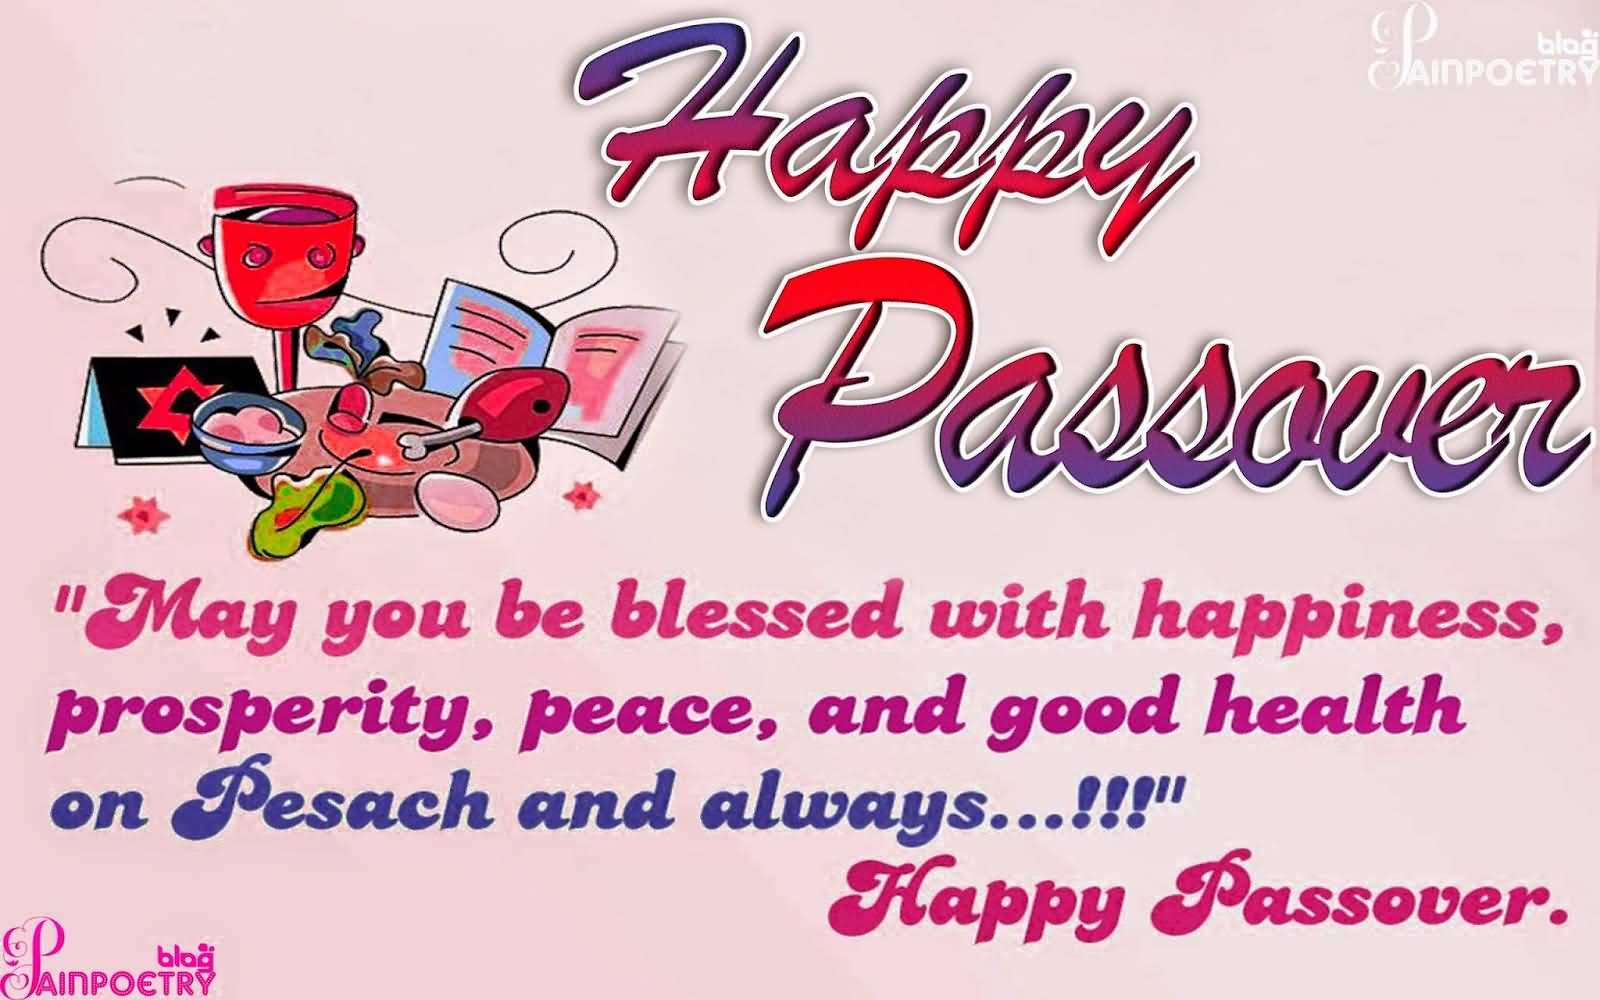 Happy Passover Wishes Greetings Message Wallpaper